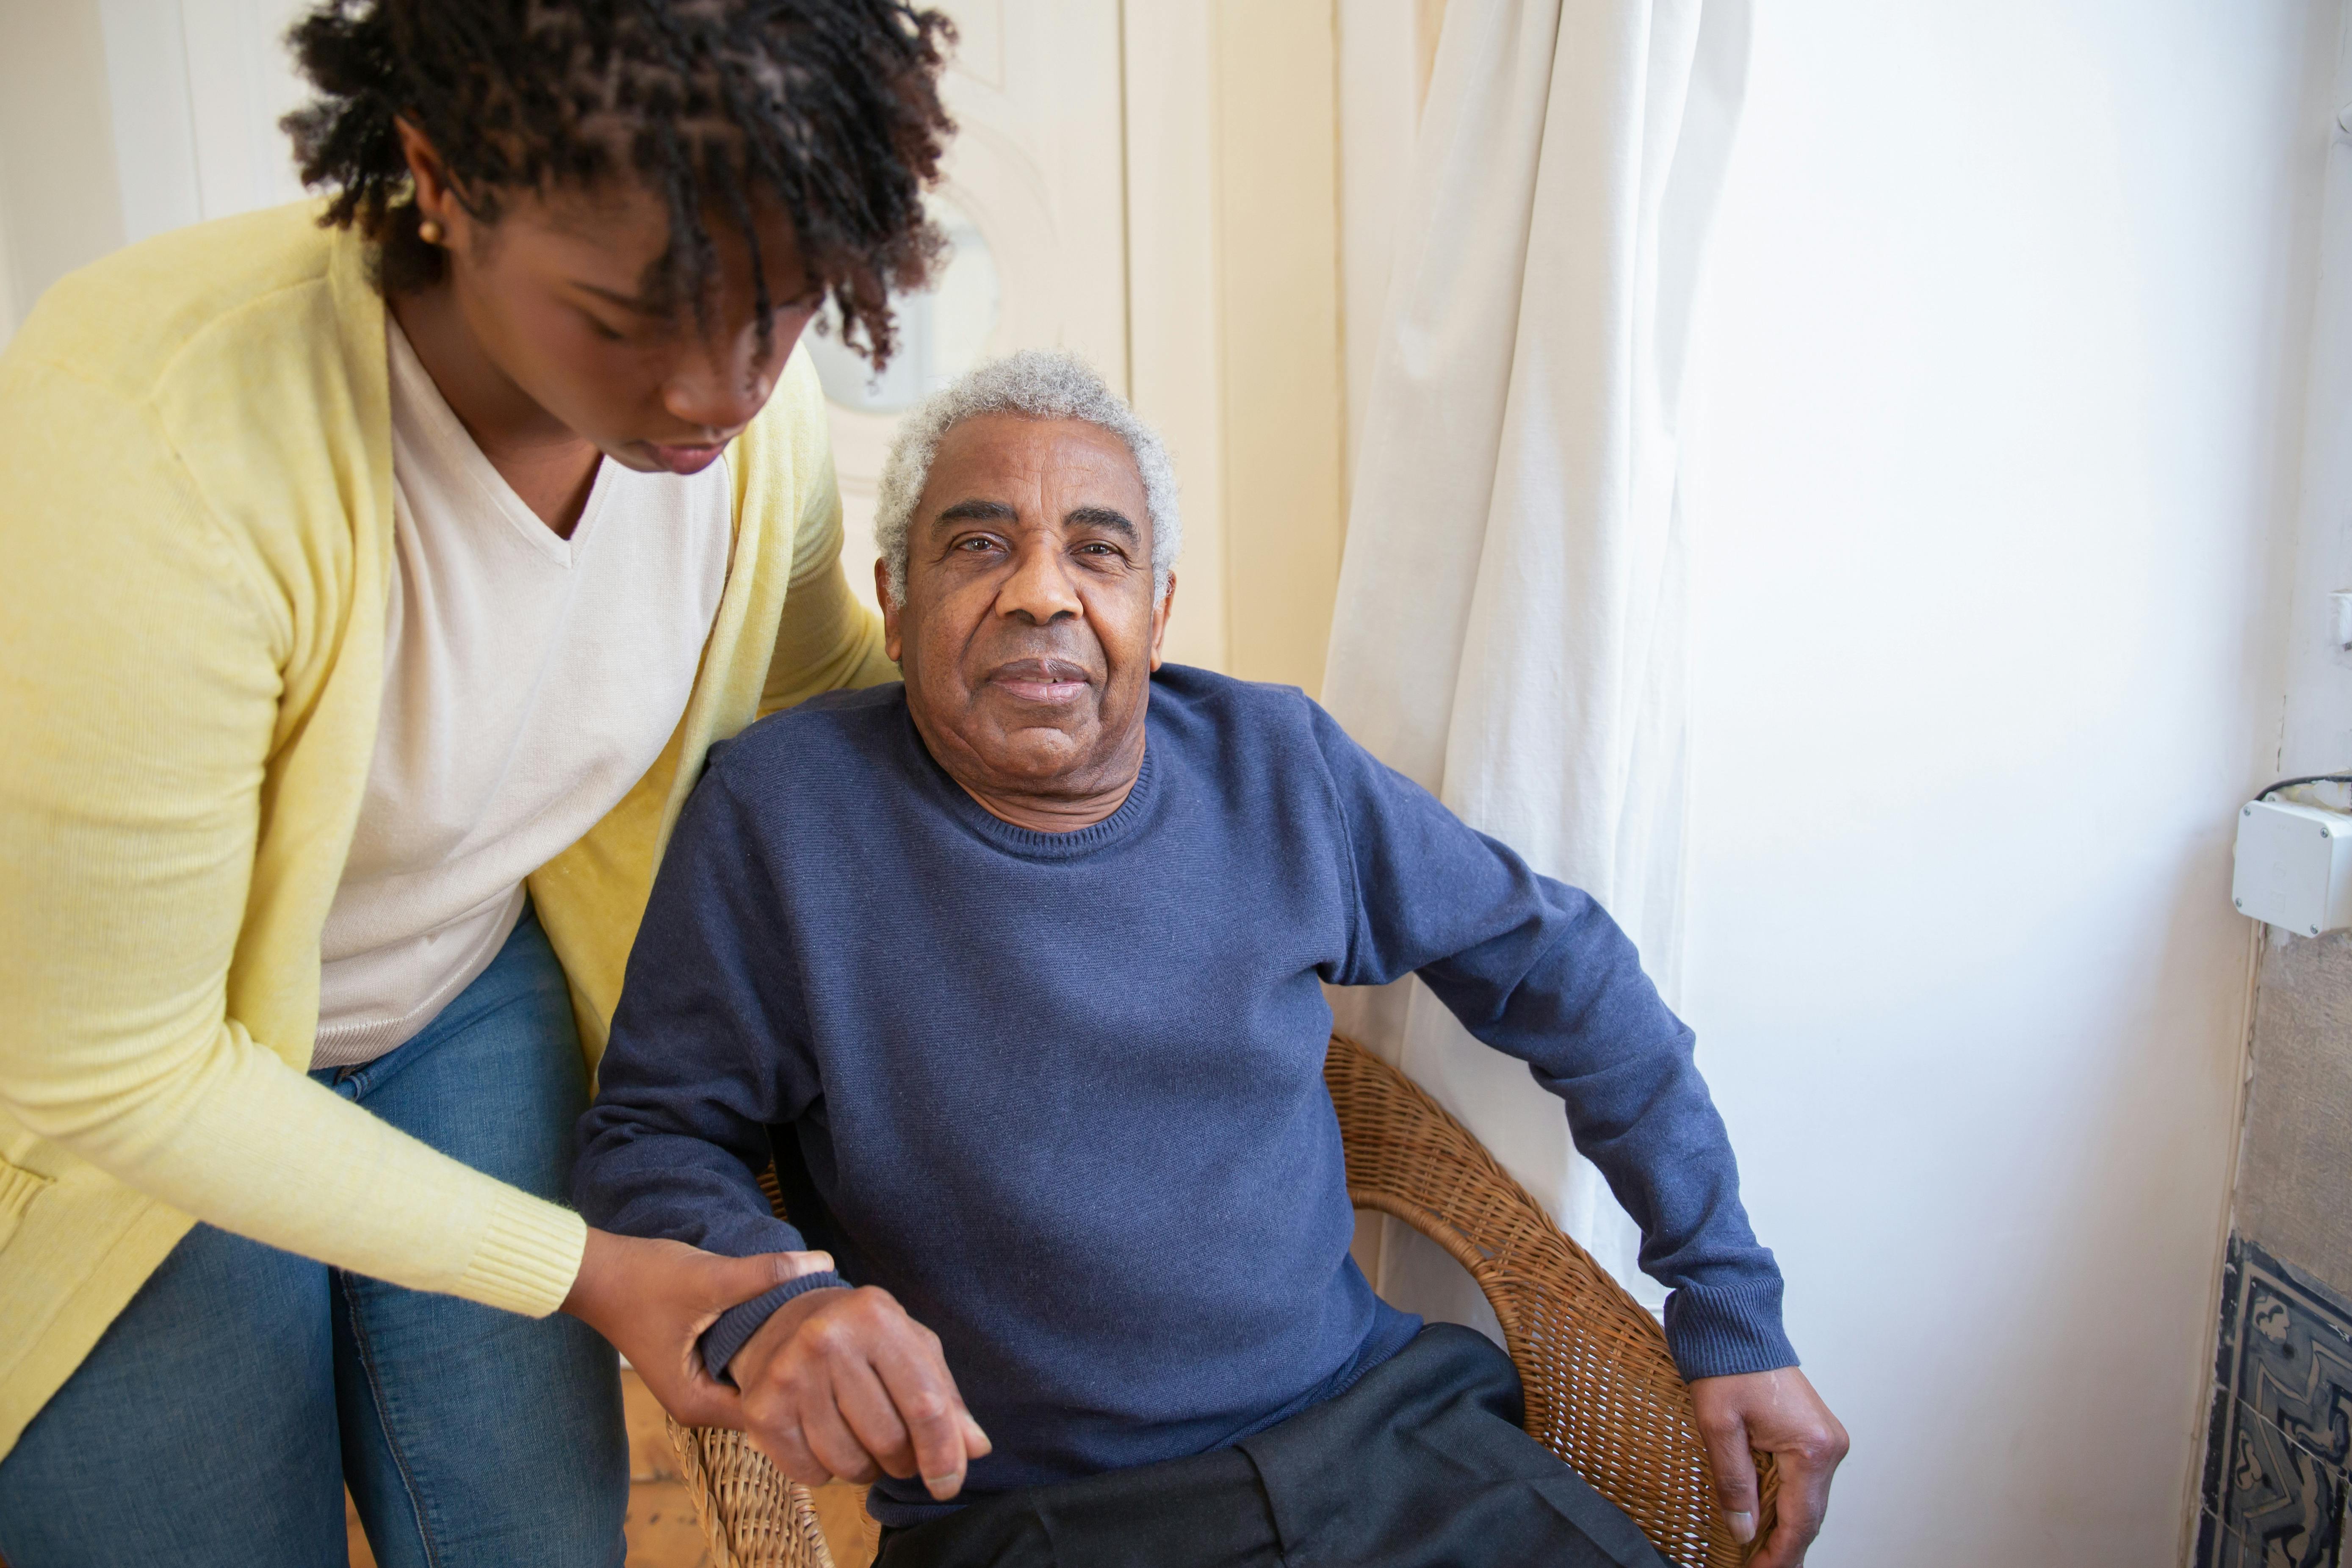 Caregiver helping older adult to feel comfortable.